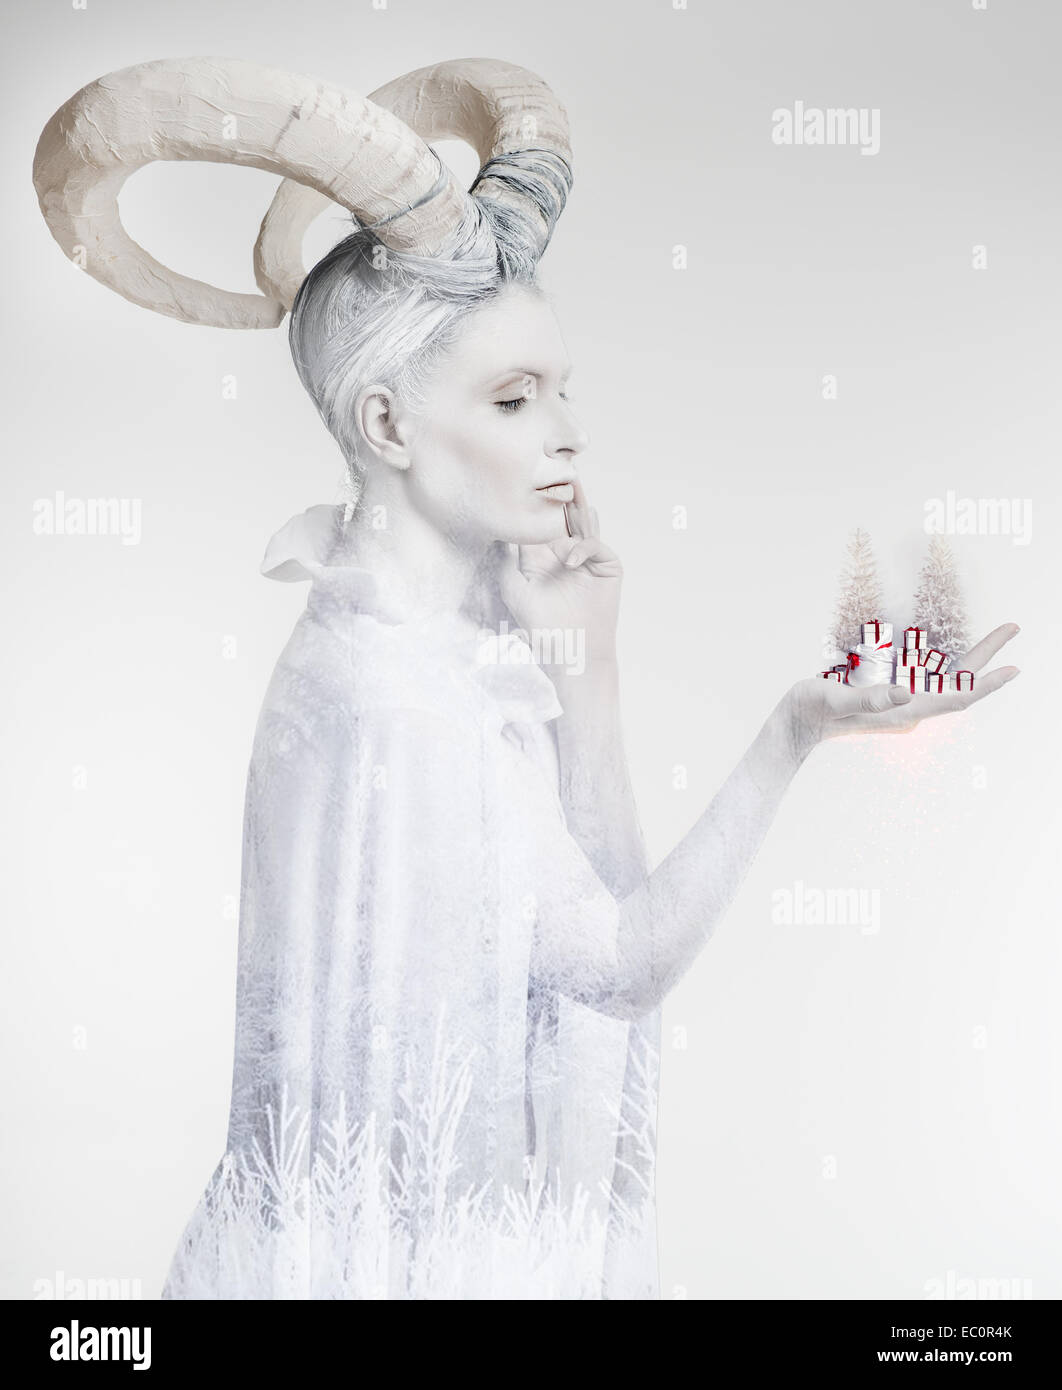 Woman with goat body-art holding small christmas trees and gift boxes Stock Photo